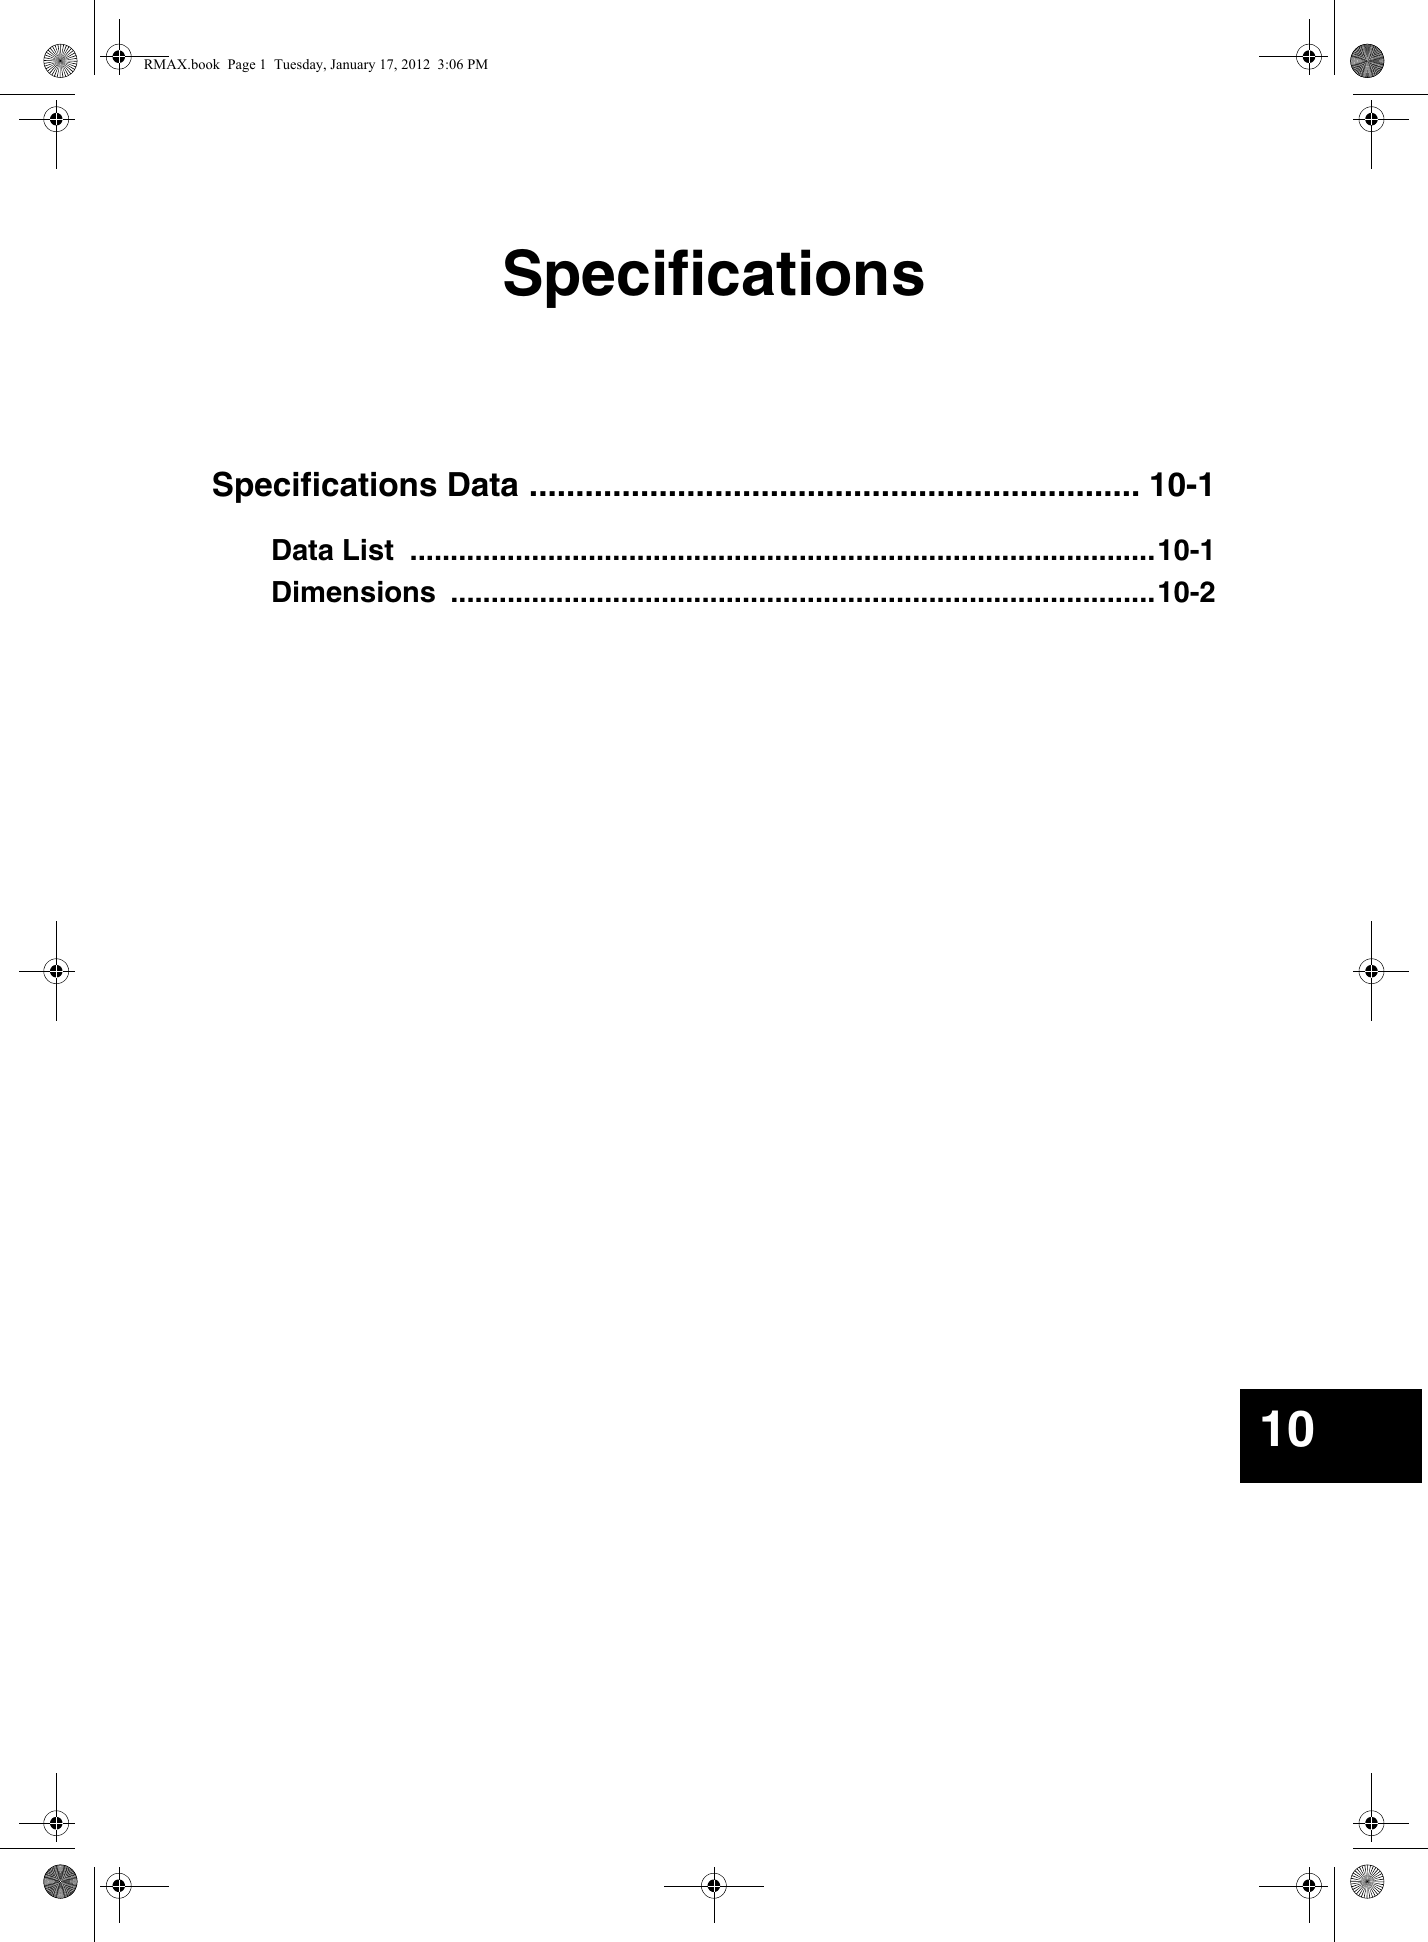 SpecificationsSpecifications Data .................................................................. 10-1Data List  ............................................................................................10-1Dimensions .......................................................................................10-210RMAX.book  Page 1  Tuesday, January 17, 2012  3:06 PM